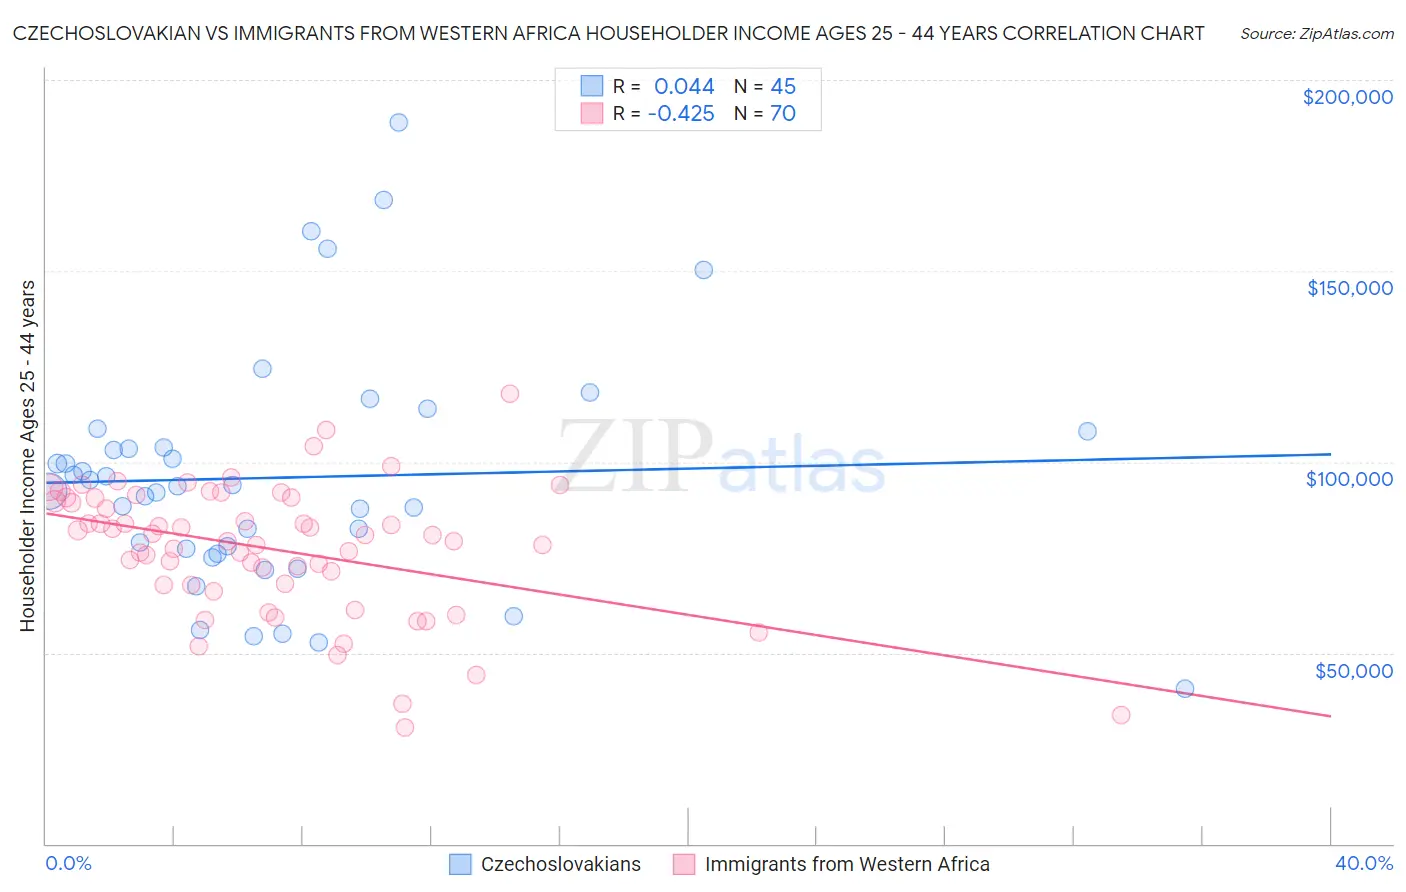 Czechoslovakian vs Immigrants from Western Africa Householder Income Ages 25 - 44 years